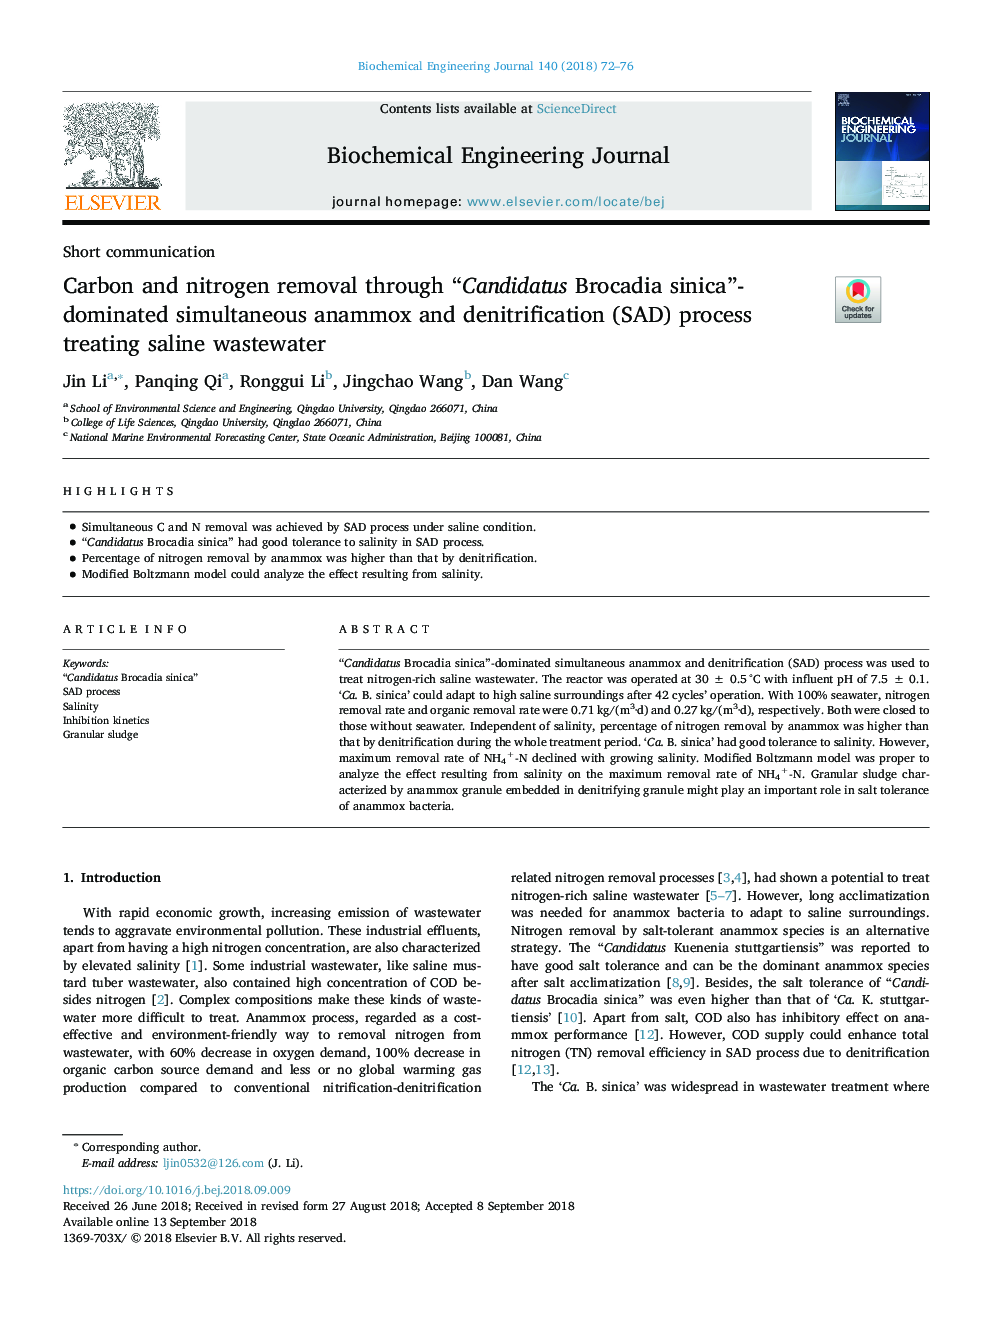 Carbon and nitrogen removal through “Candidatus Brocadia sinica”-dominated simultaneous anammox and denitrification (SAD) process treating saline wastewater